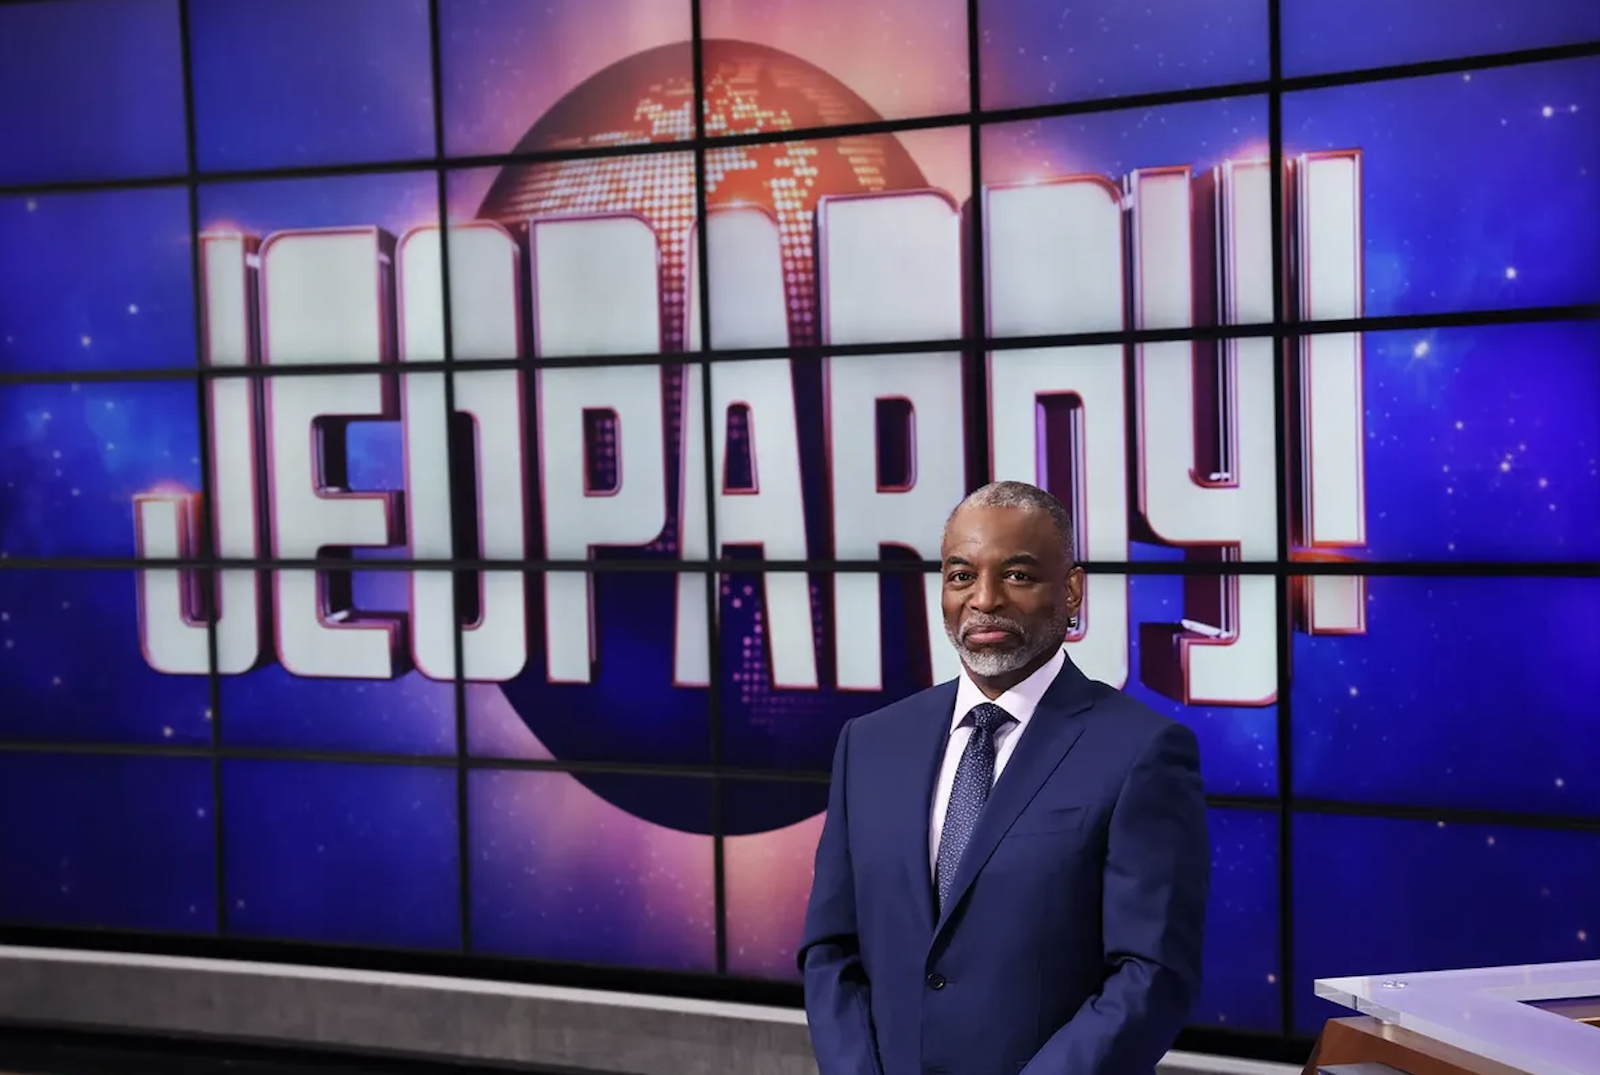 LeVar Burton standing in front of the Jeopardy! screens